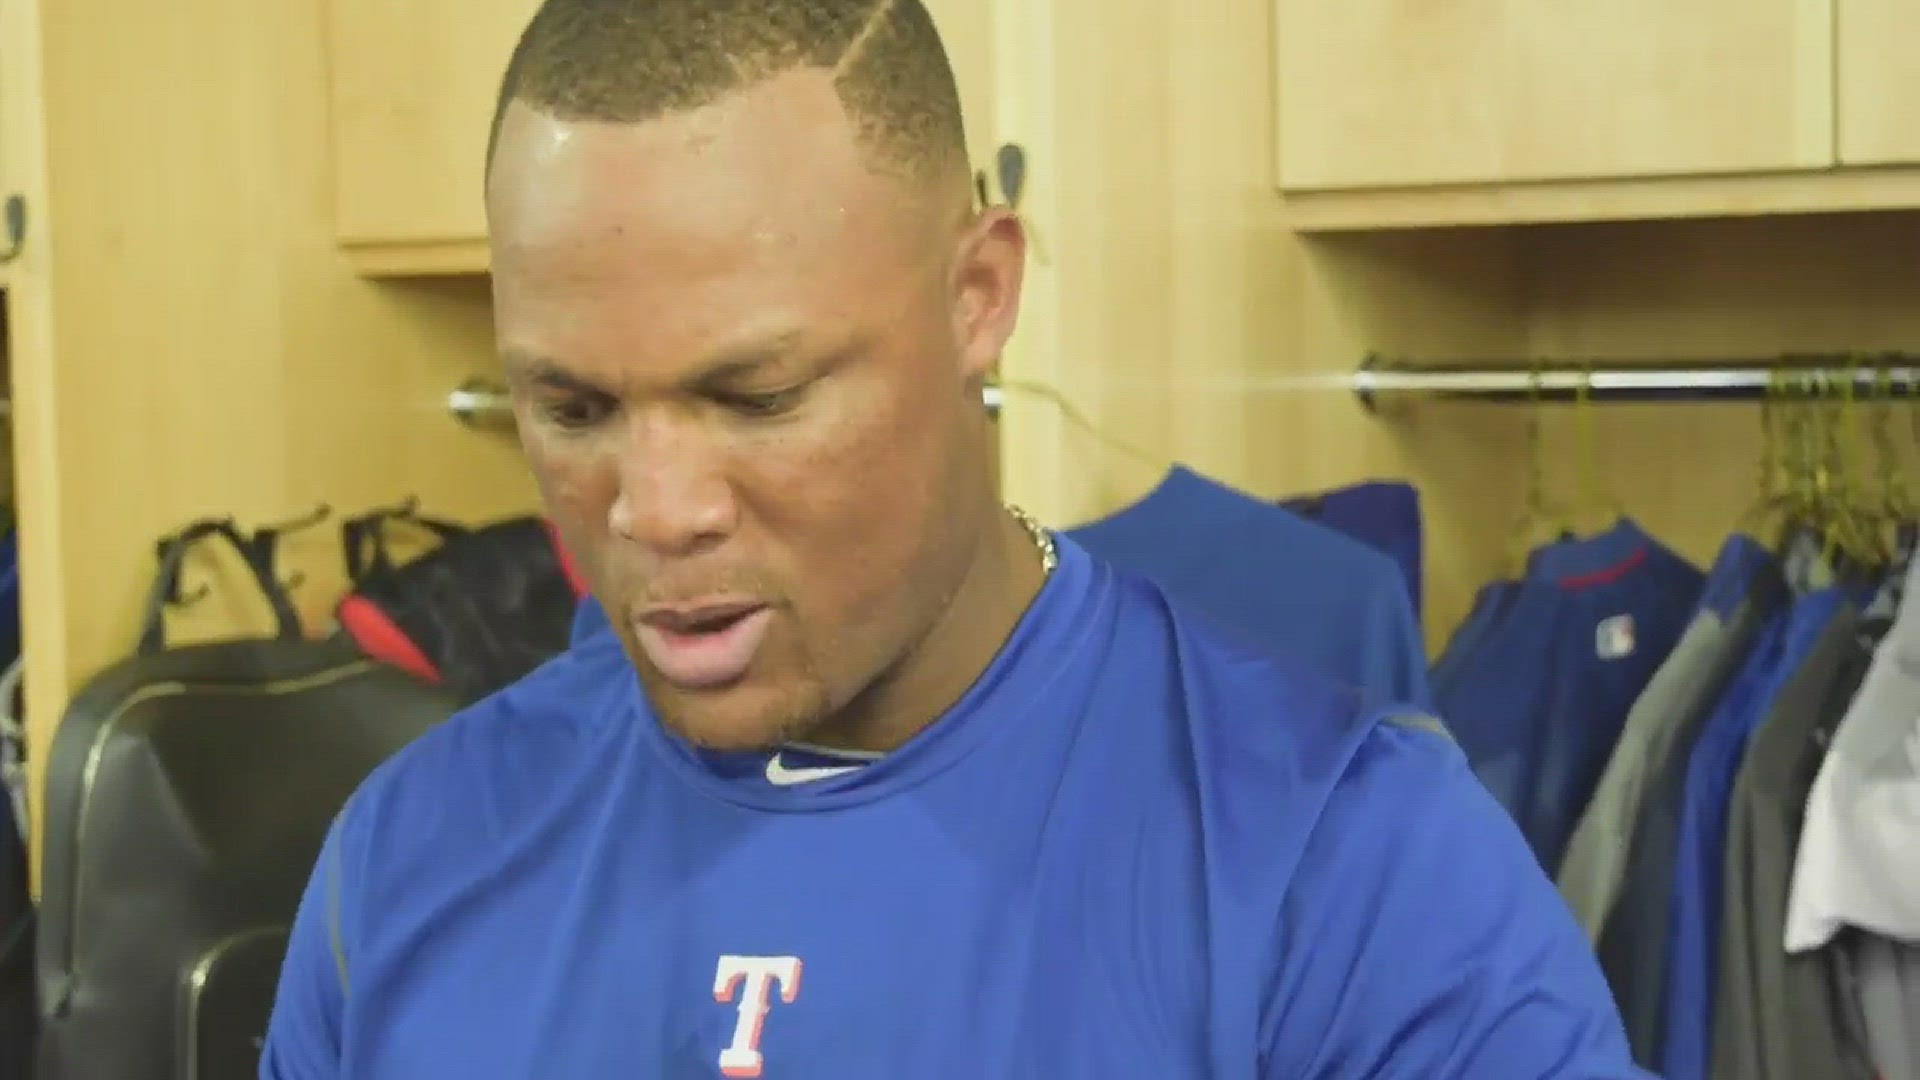 Adrian Beltre unexpectedly played in today's game against the Mariners in Surprise, AZ. After leaving the game, he spoke to the media about how he felt.